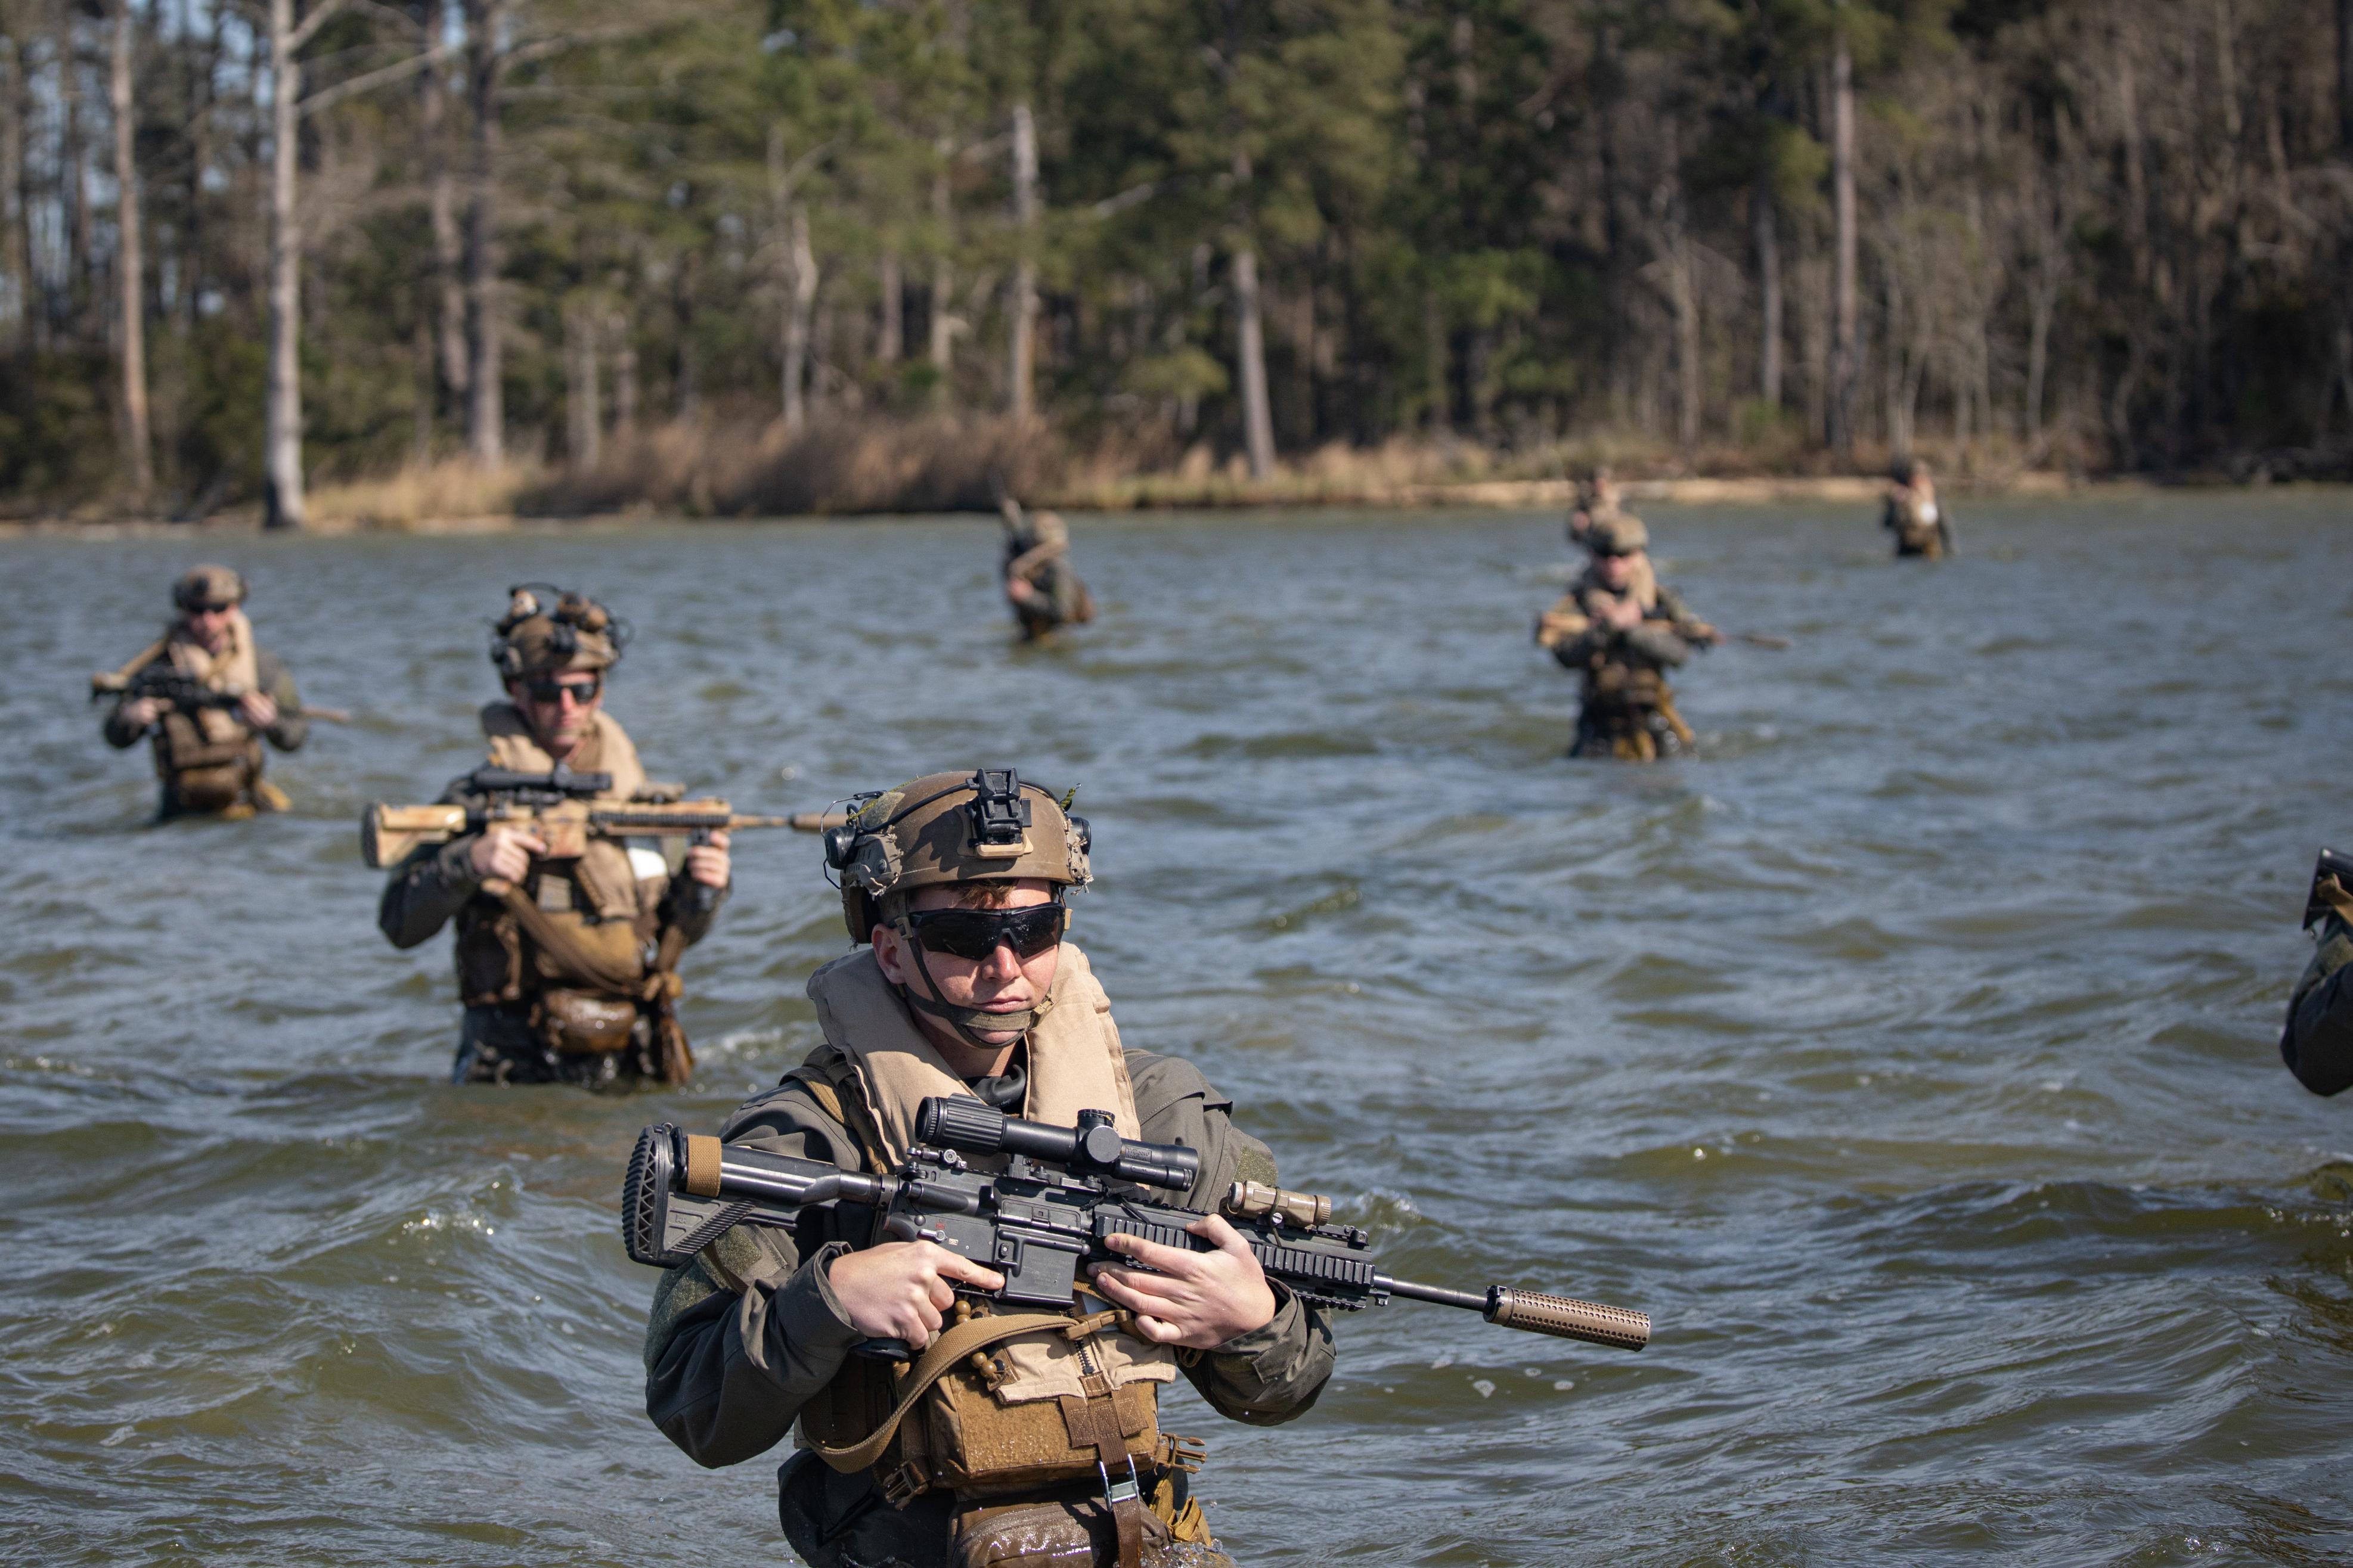 U.S. Marines with Charlie Company, Battalion Landing Team (BLT) 1/6, 26th Marine Expeditionary Unit (MEU) conduct boat patrols during a littoral movement as part of MEU Exercise III on Camp Lejeune, North Carolina, March 11, 2023. BLT 1/6 continues to enhance RHIB familiarization and readiness through conducting on and off and shore-to-shore drills prior to deployment. The 11m RHIBs provide the Marine Air-Ground Task Force Commander a high-speed, long –range, low-signature combatant craft capable of projecting and recovering Marines for a variety of missions. (U.S. Marine Corps photo by Cpl. Aziza Kamuhanda)